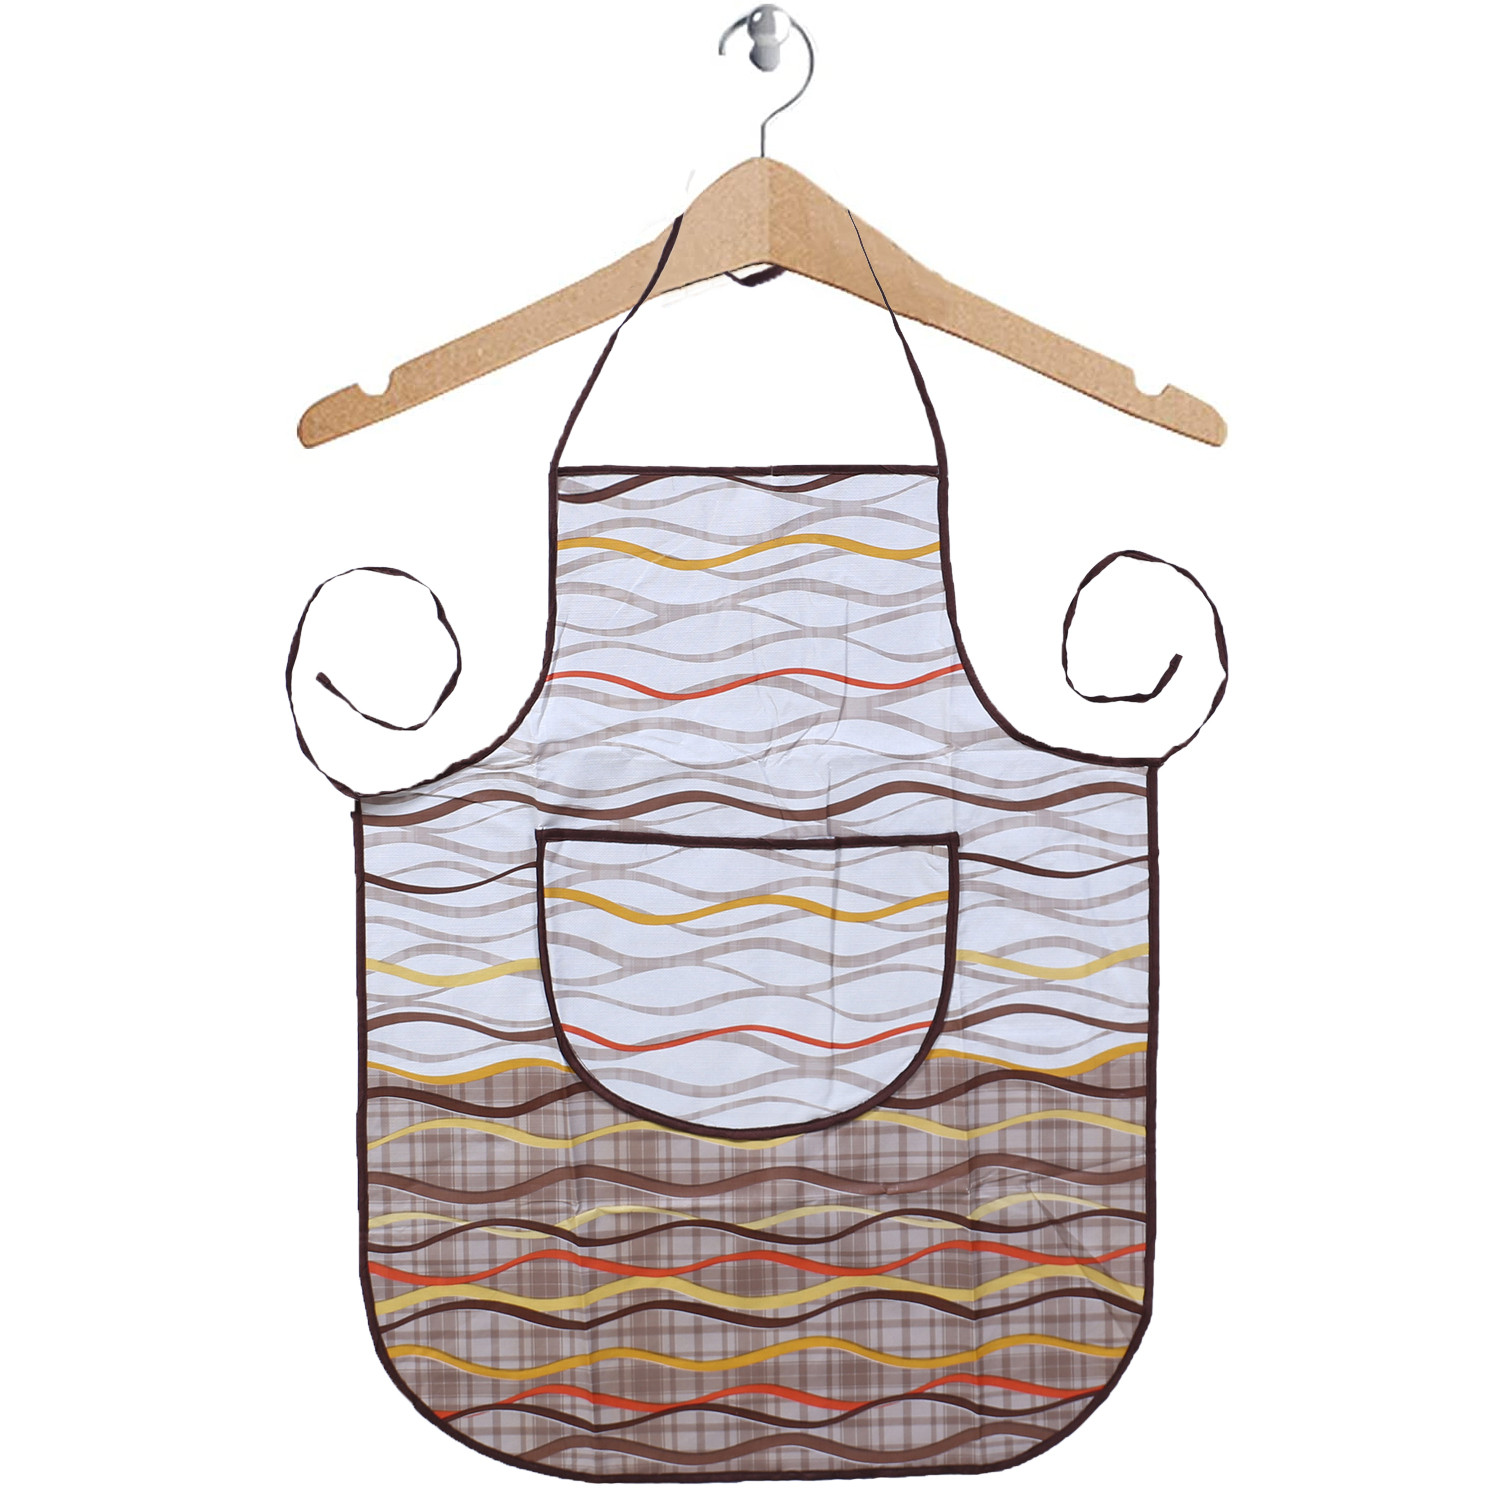 Kuber Industries Apron|PVC Unique Strips Printed Kitchen Chef Cloth|Waterproof Centre Pocket Apron With Tying Cord for Men & Women (Multicolor)